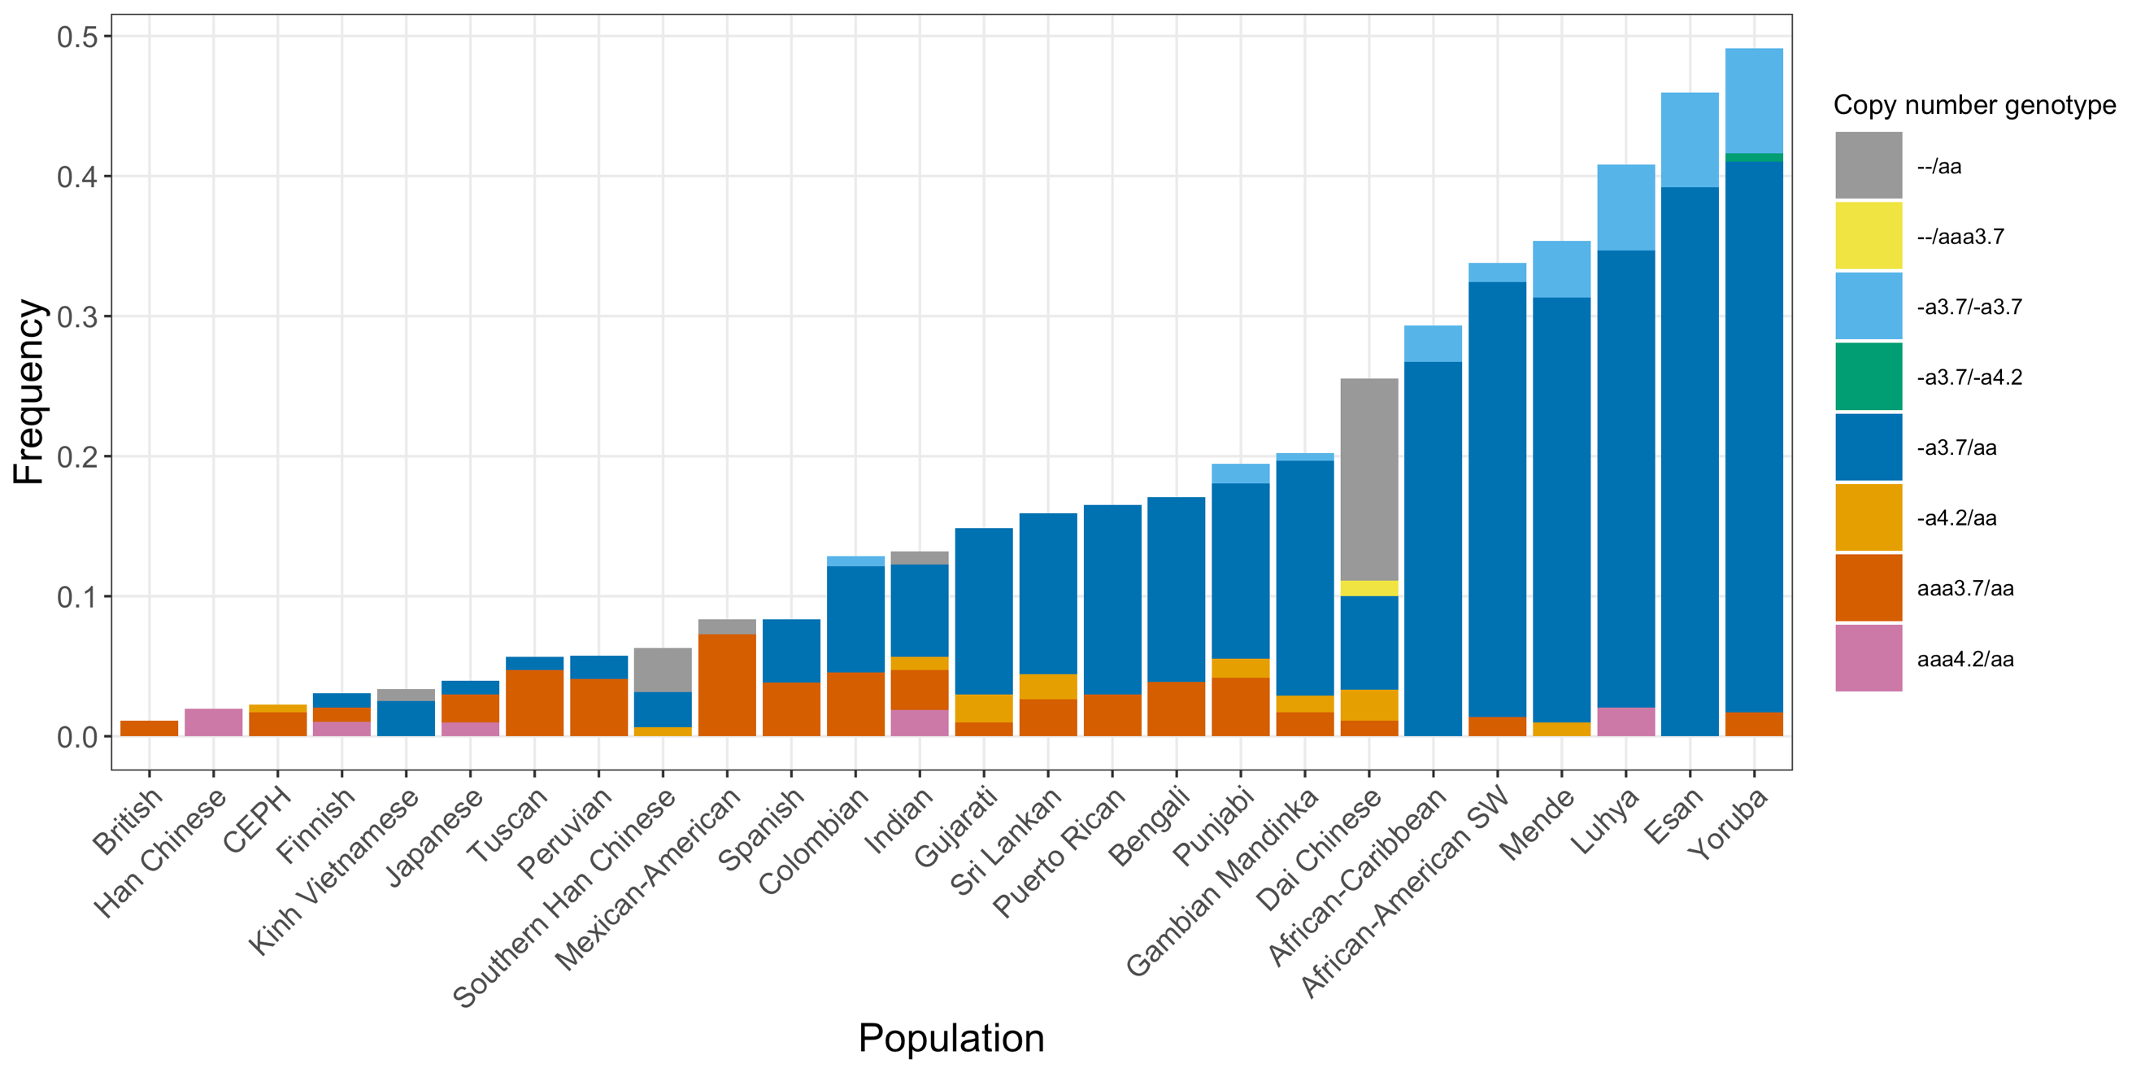 Figure 4. Distribution of copy number genotypes made by the DRAGEN HBA caller across 26 populations in 1KGP data